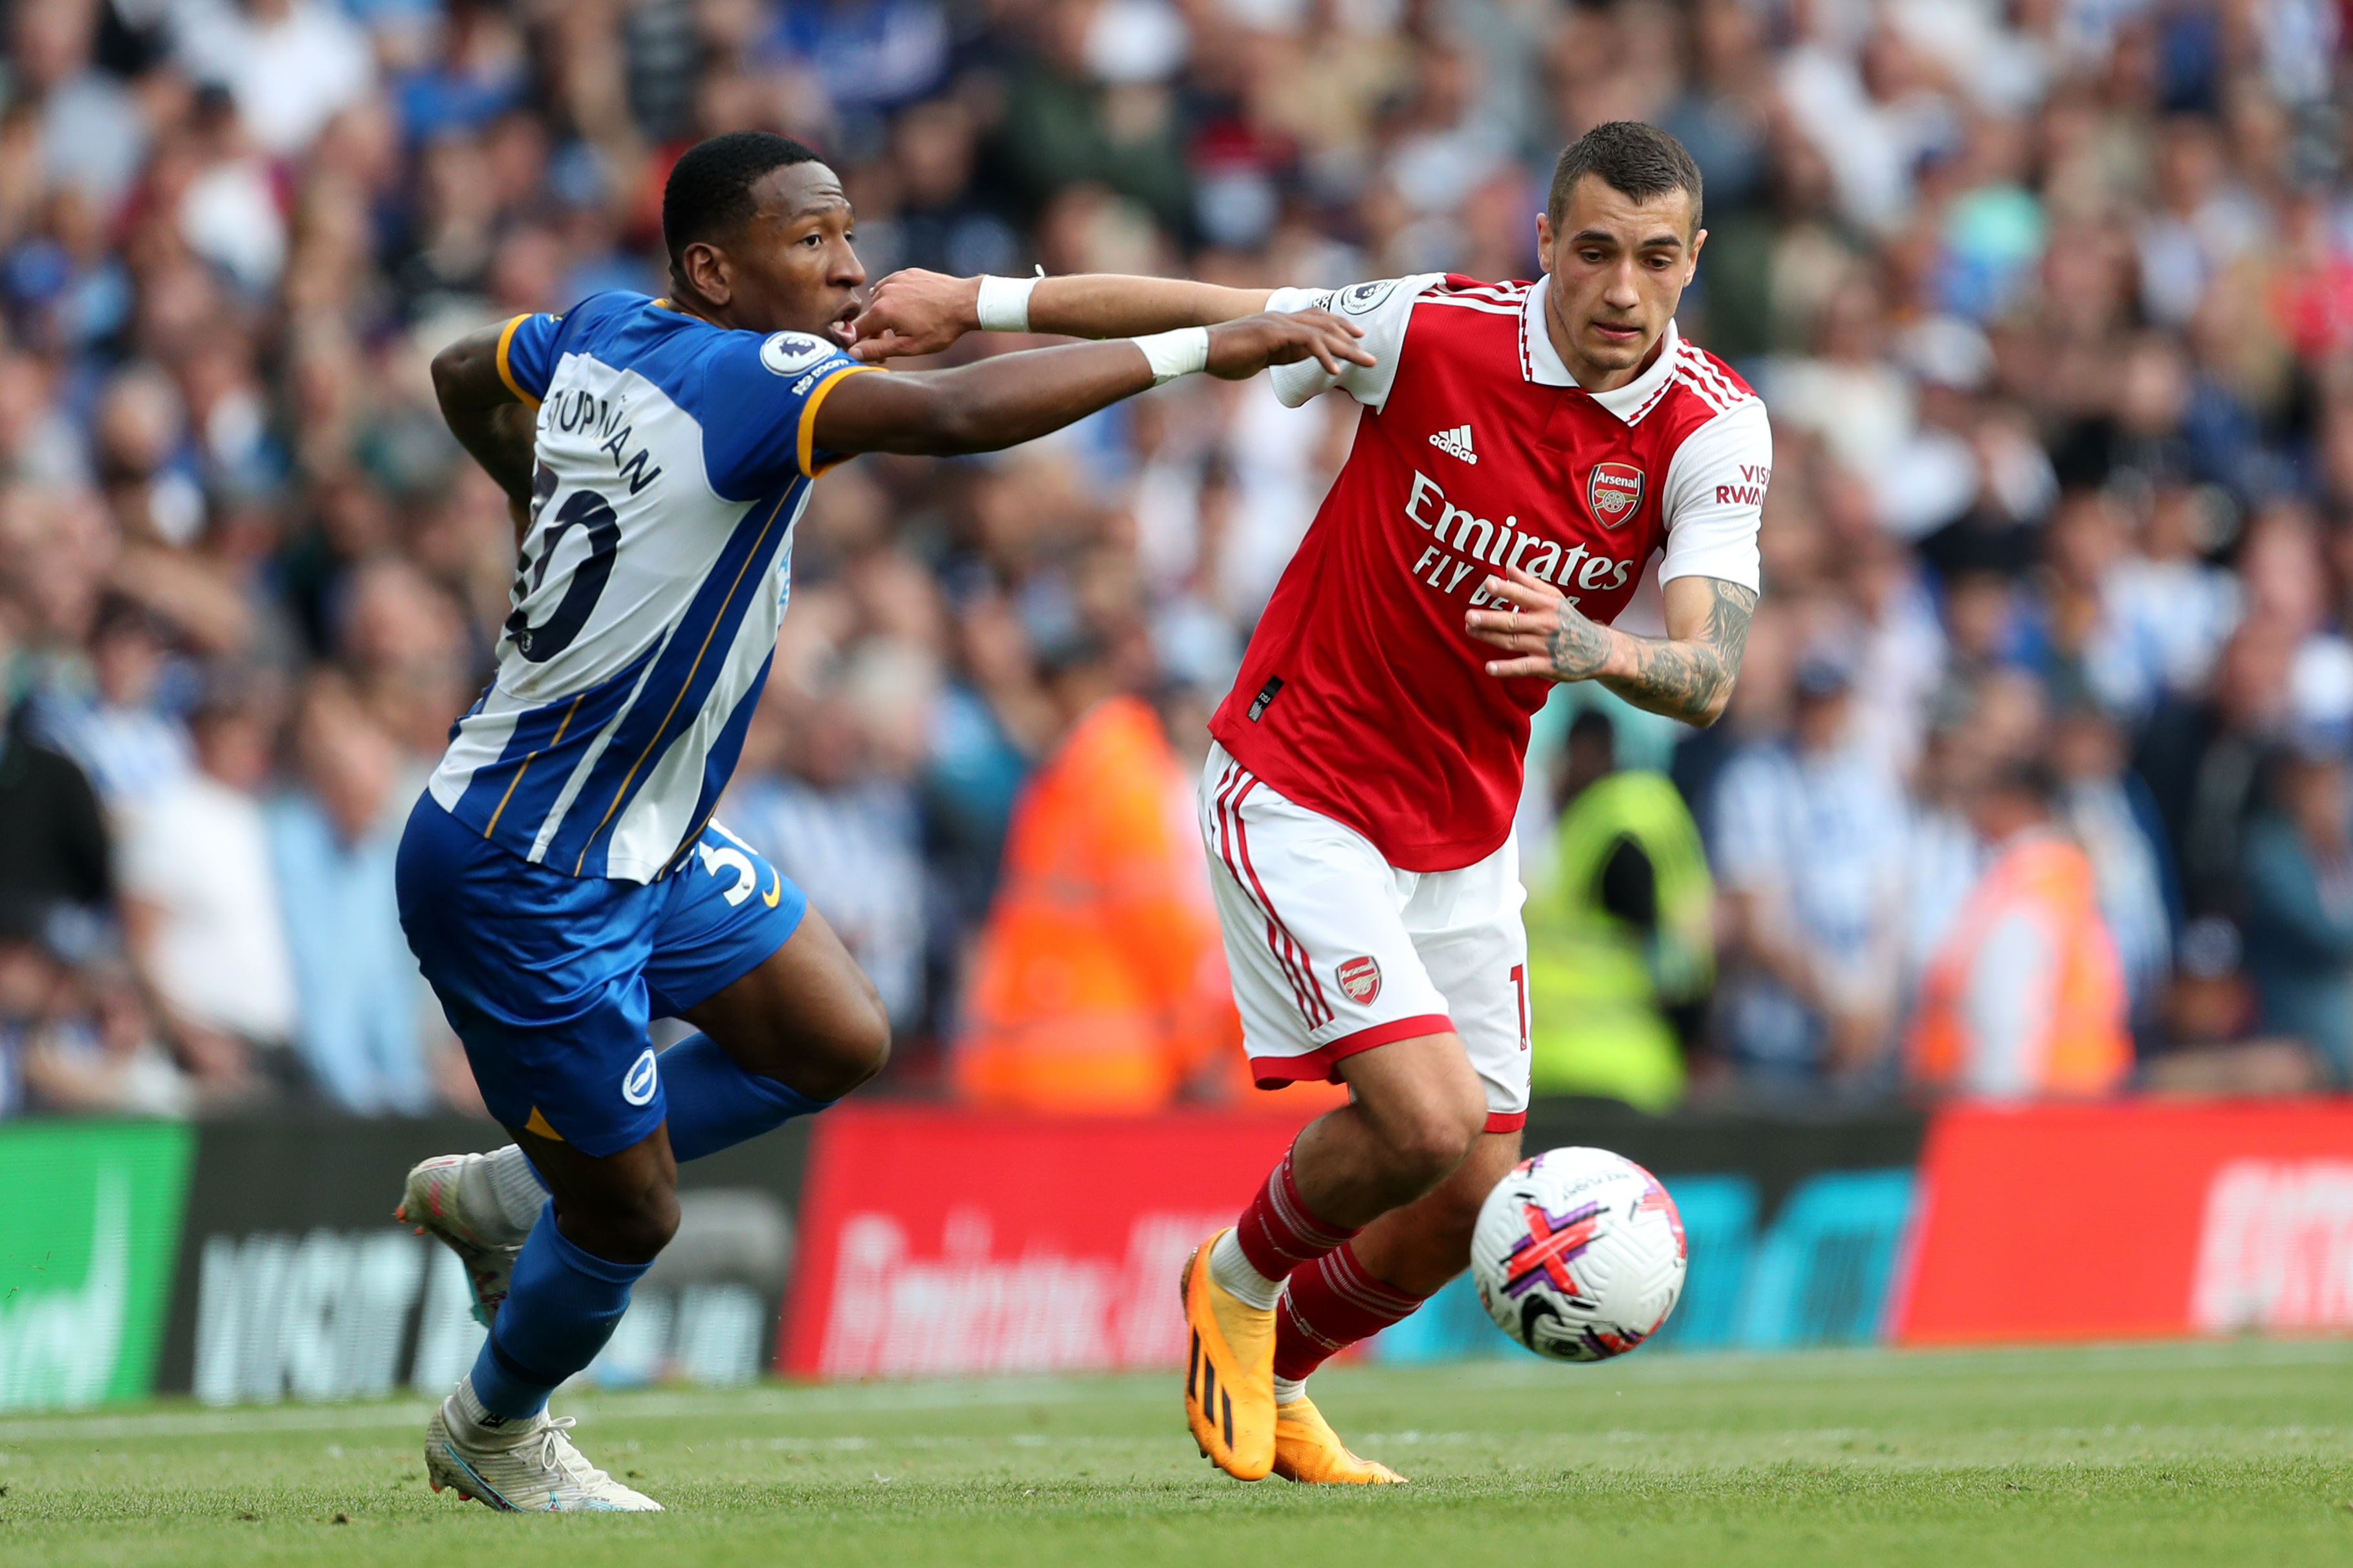 Kiwior insists he was fouled for Brighton opener but claim leaves Arsenal legend unimpressed 